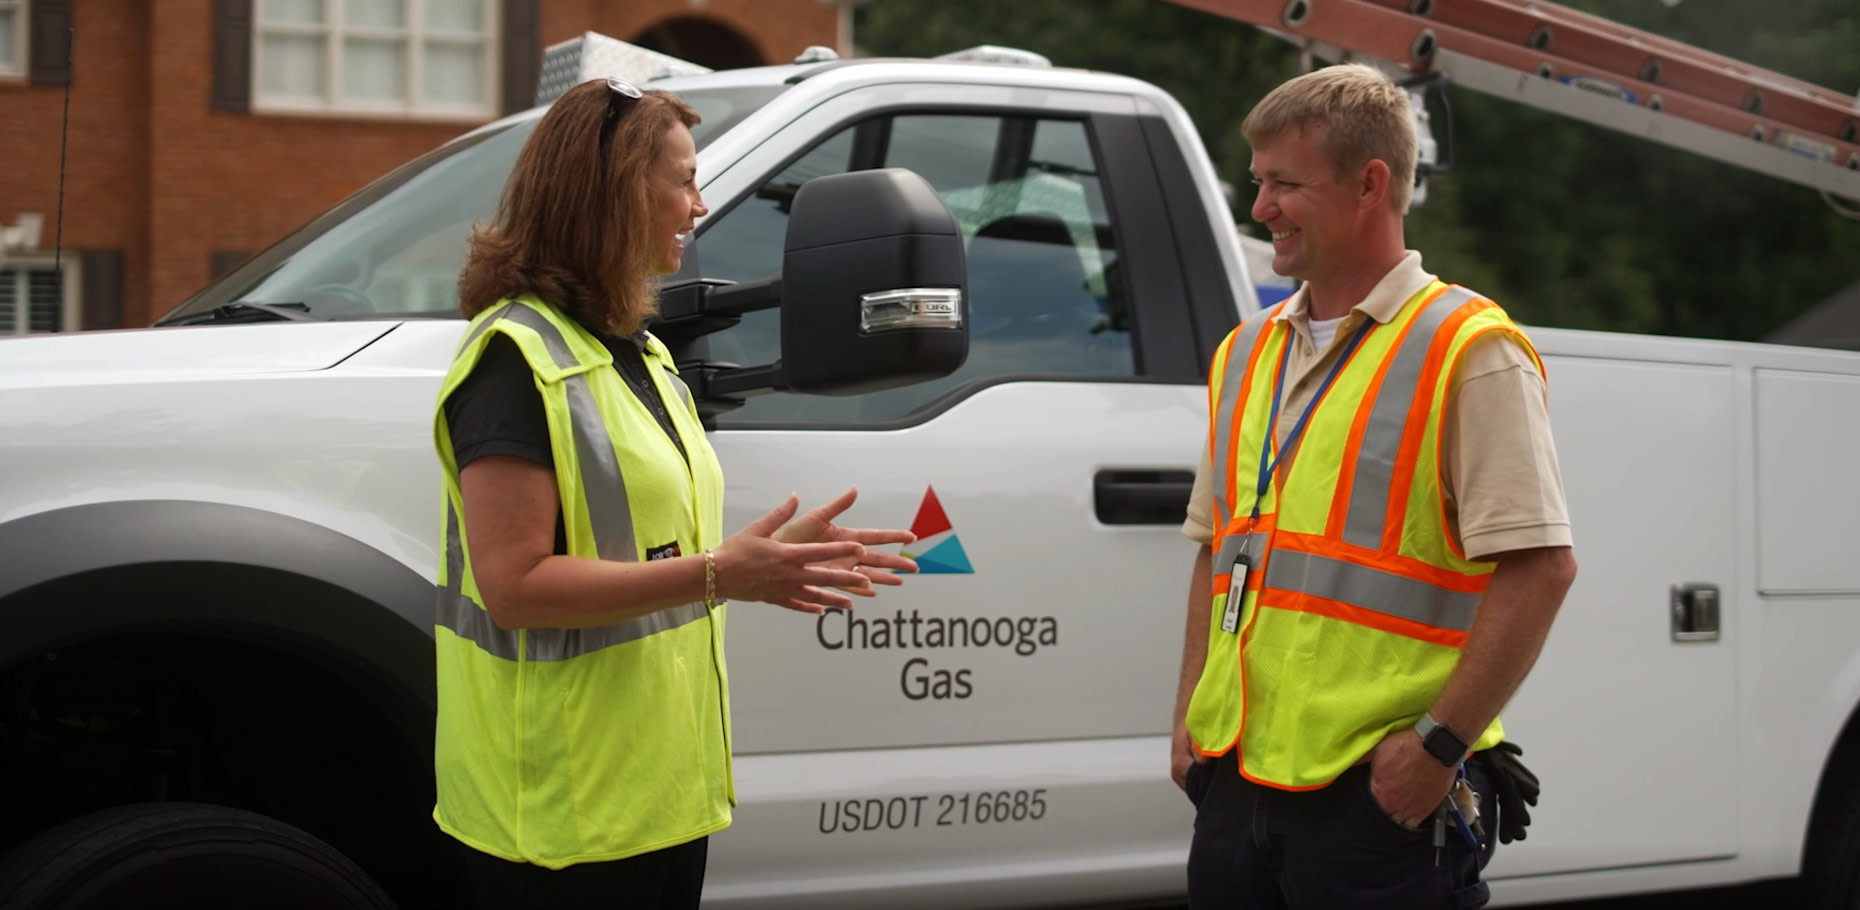 KnowESG_100% Next-Gen Gas for Chattanooga Homes